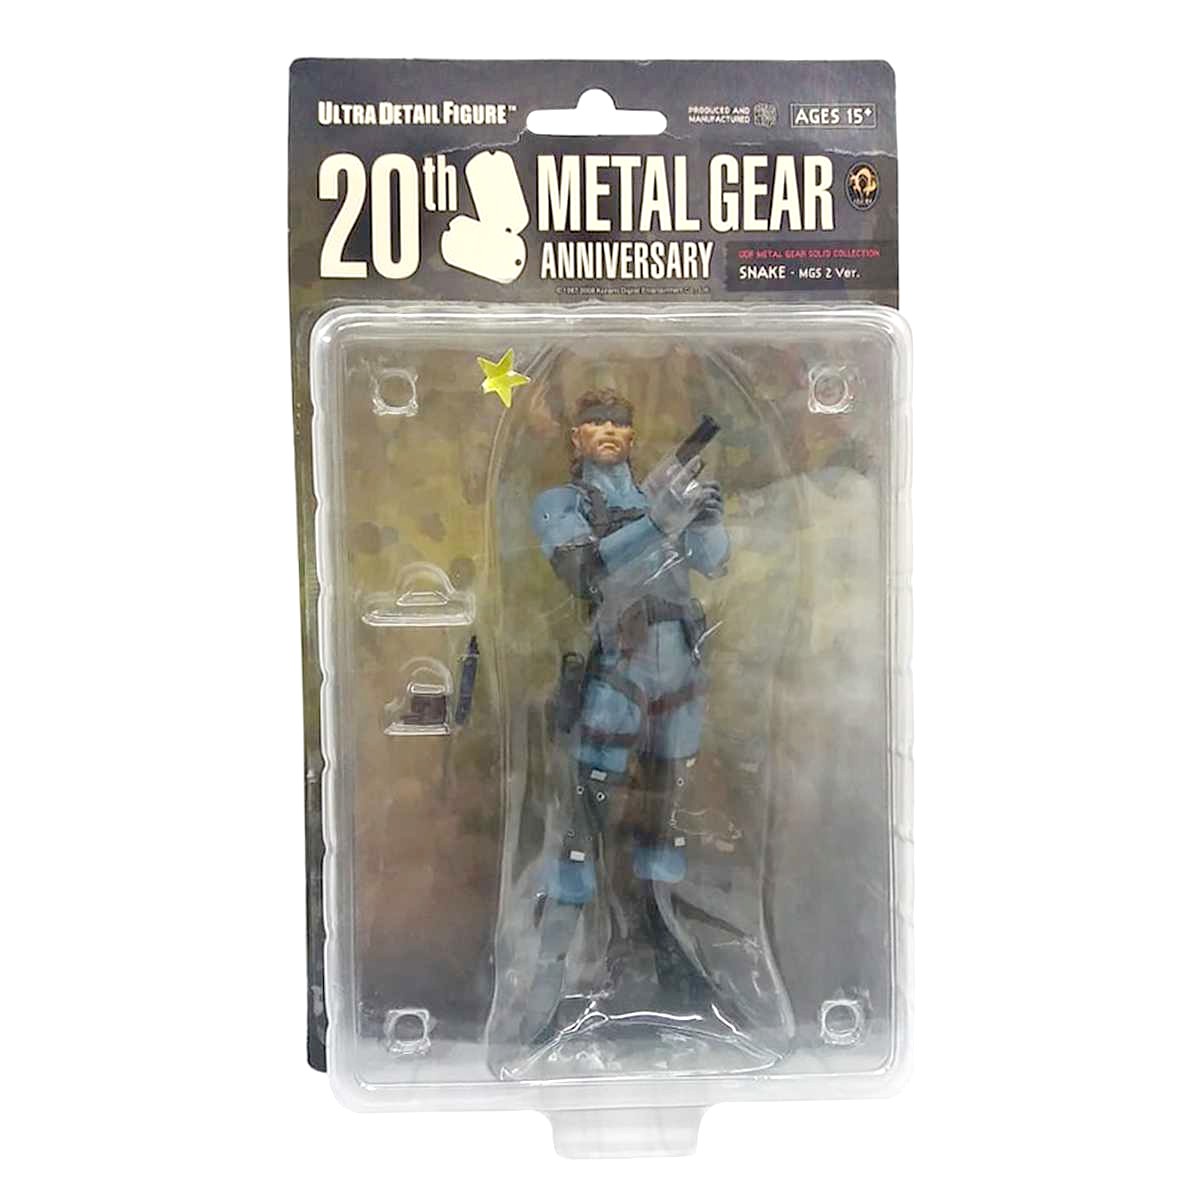 Snake Metal Gear Solid MGS 2 20th Anniversary marca Medicom action figures na cartela